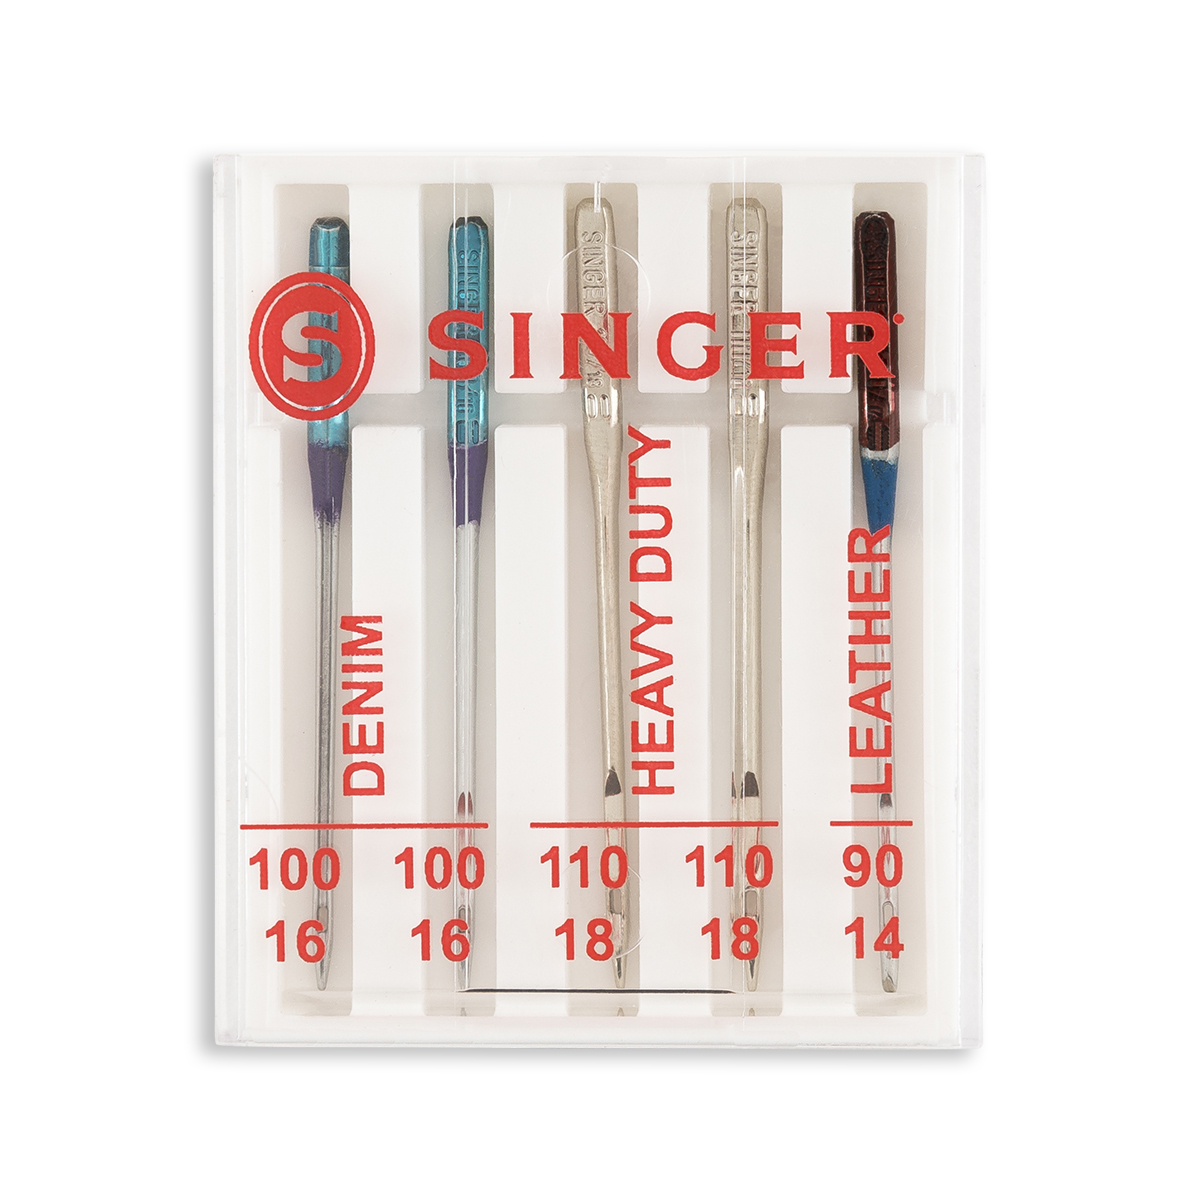 5 x Singer Leather Needles (2032) Assorted 90/14, 100/16